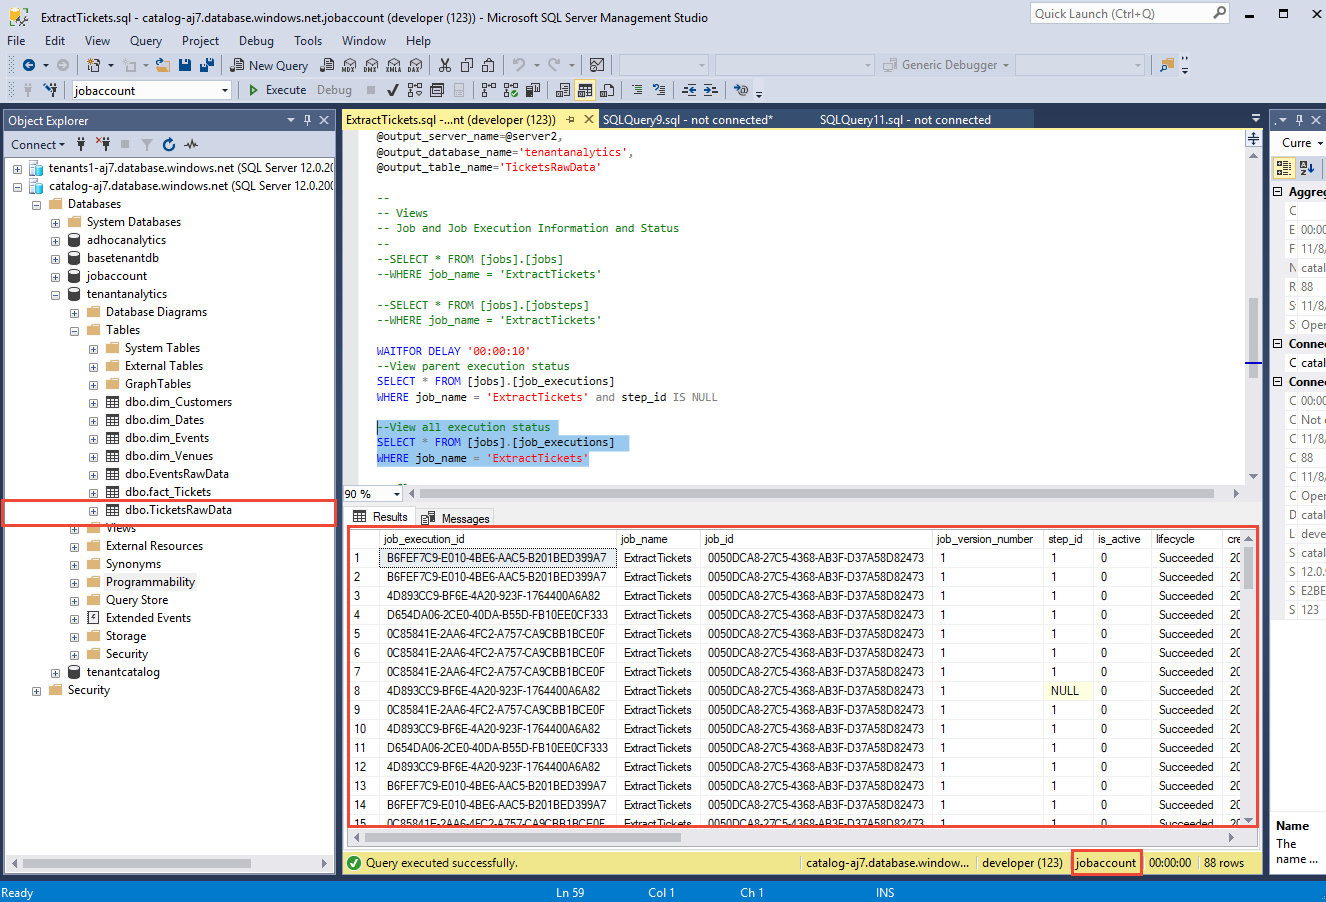 Screenshot shows the ExtractTickets database with the TicketsRawData d b o selected in Object Explorer.